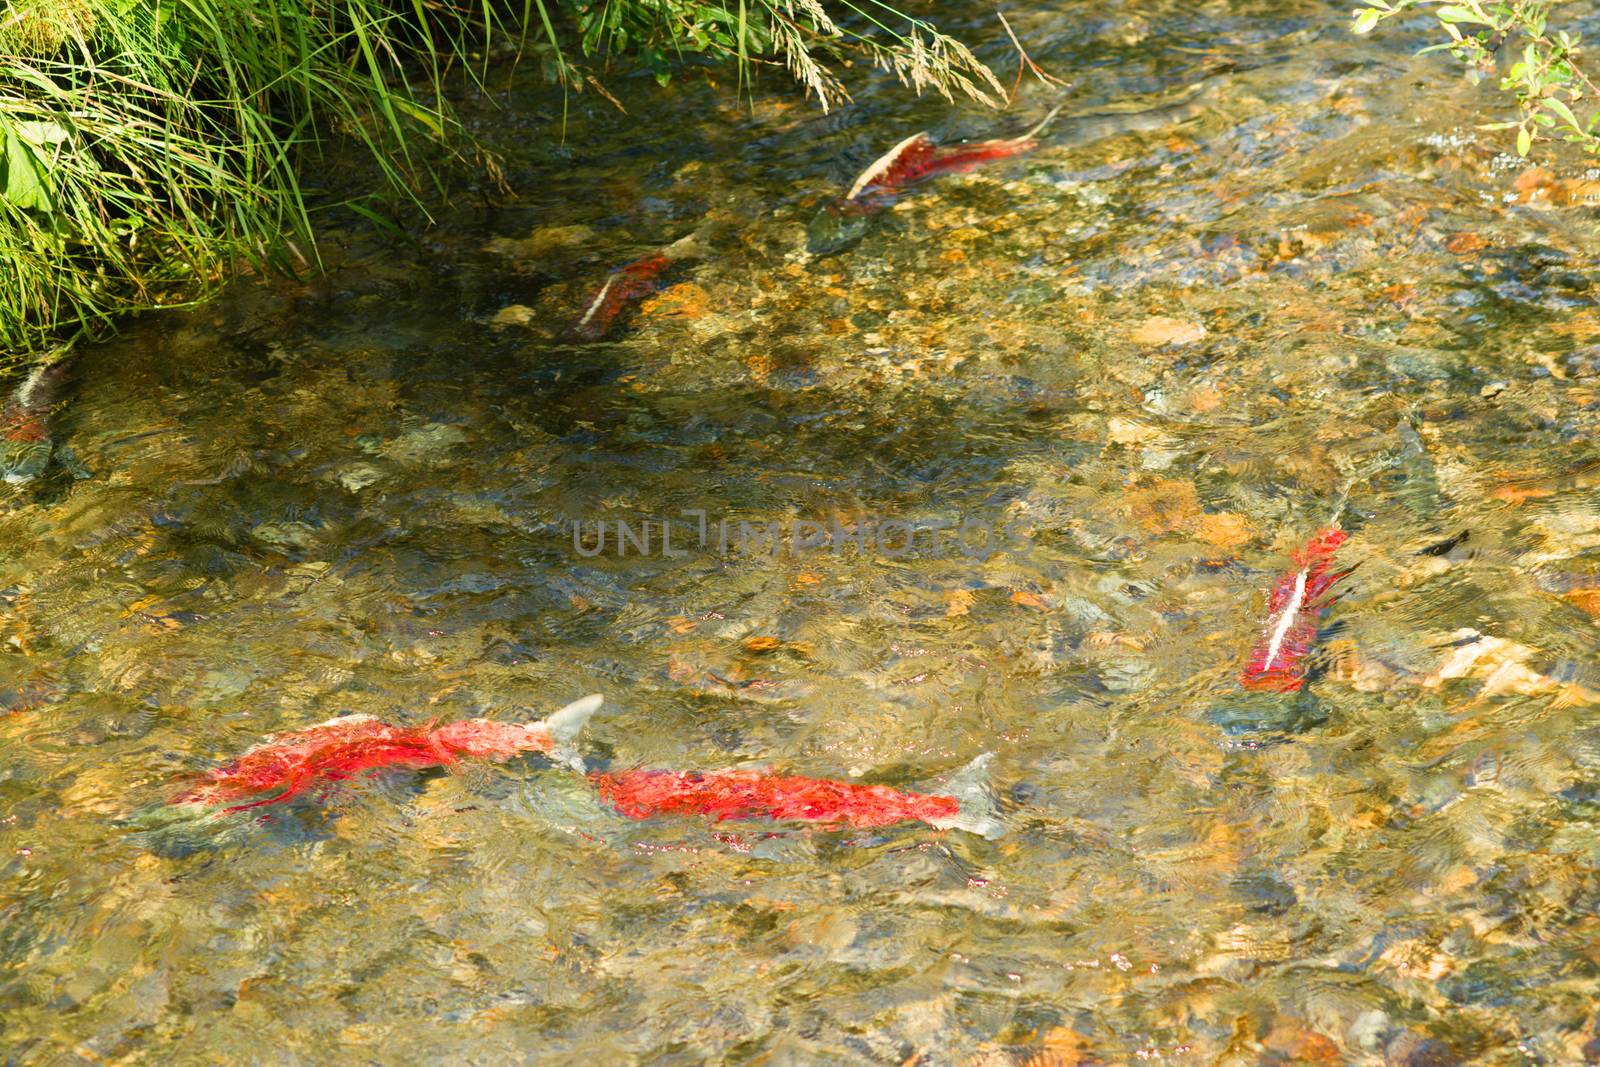 Spawning Fish Wild Salmon Swim Stream River Mating Swimming by ChrisBoswell